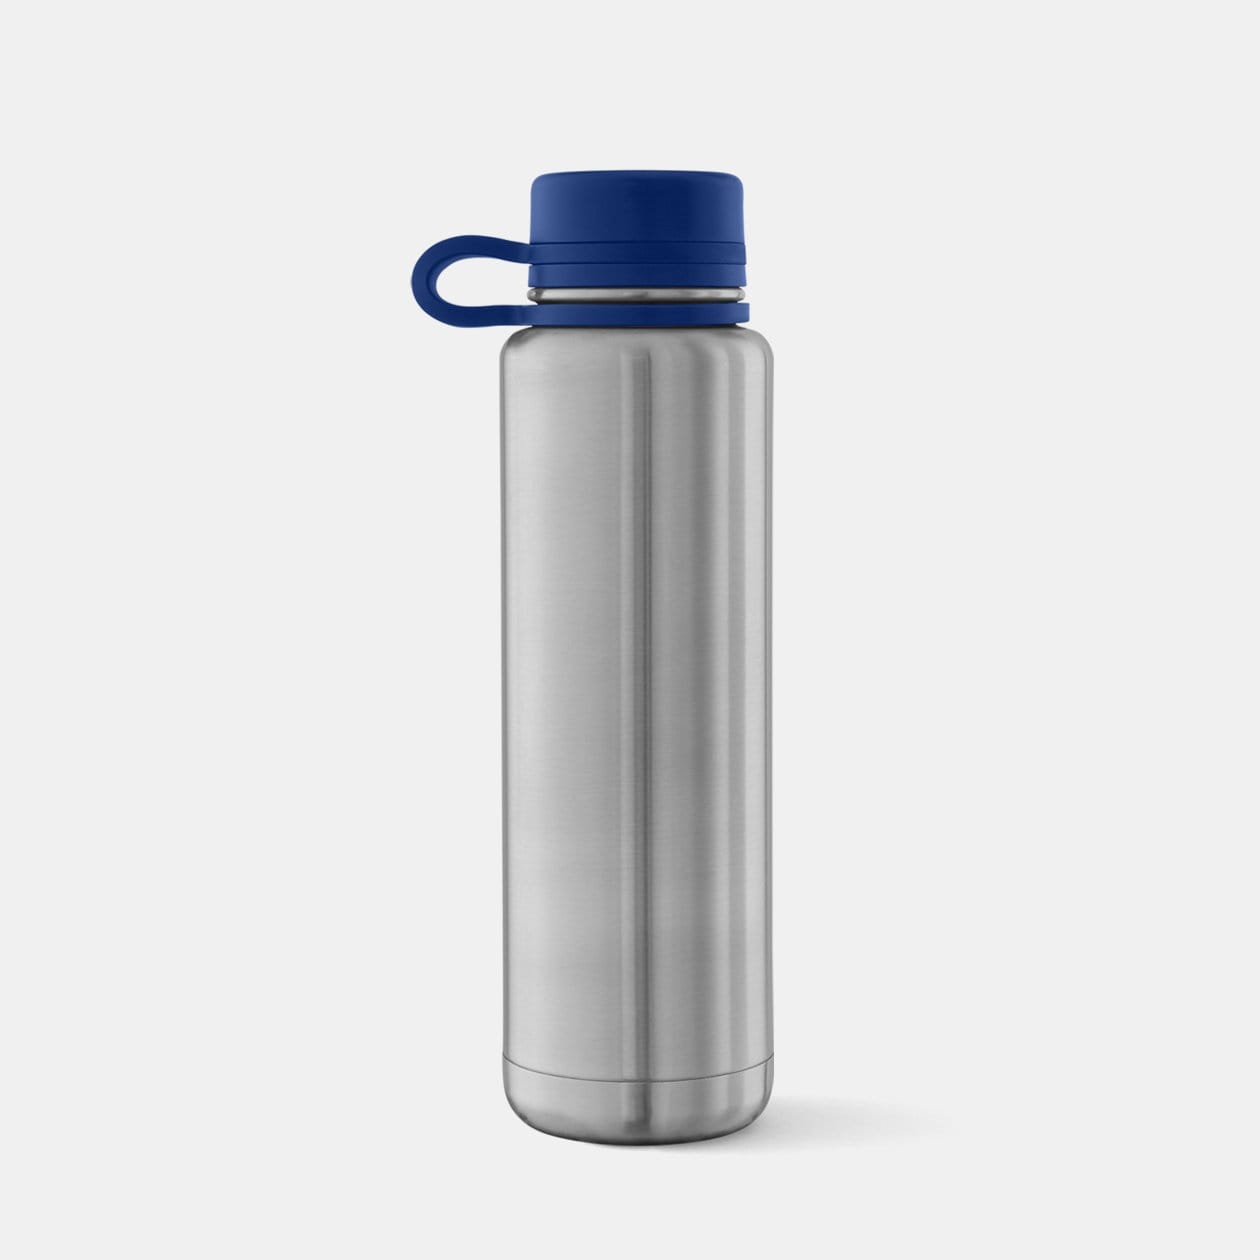 PlanetBox 18 oz Stainless Steel Water Bottle Blue